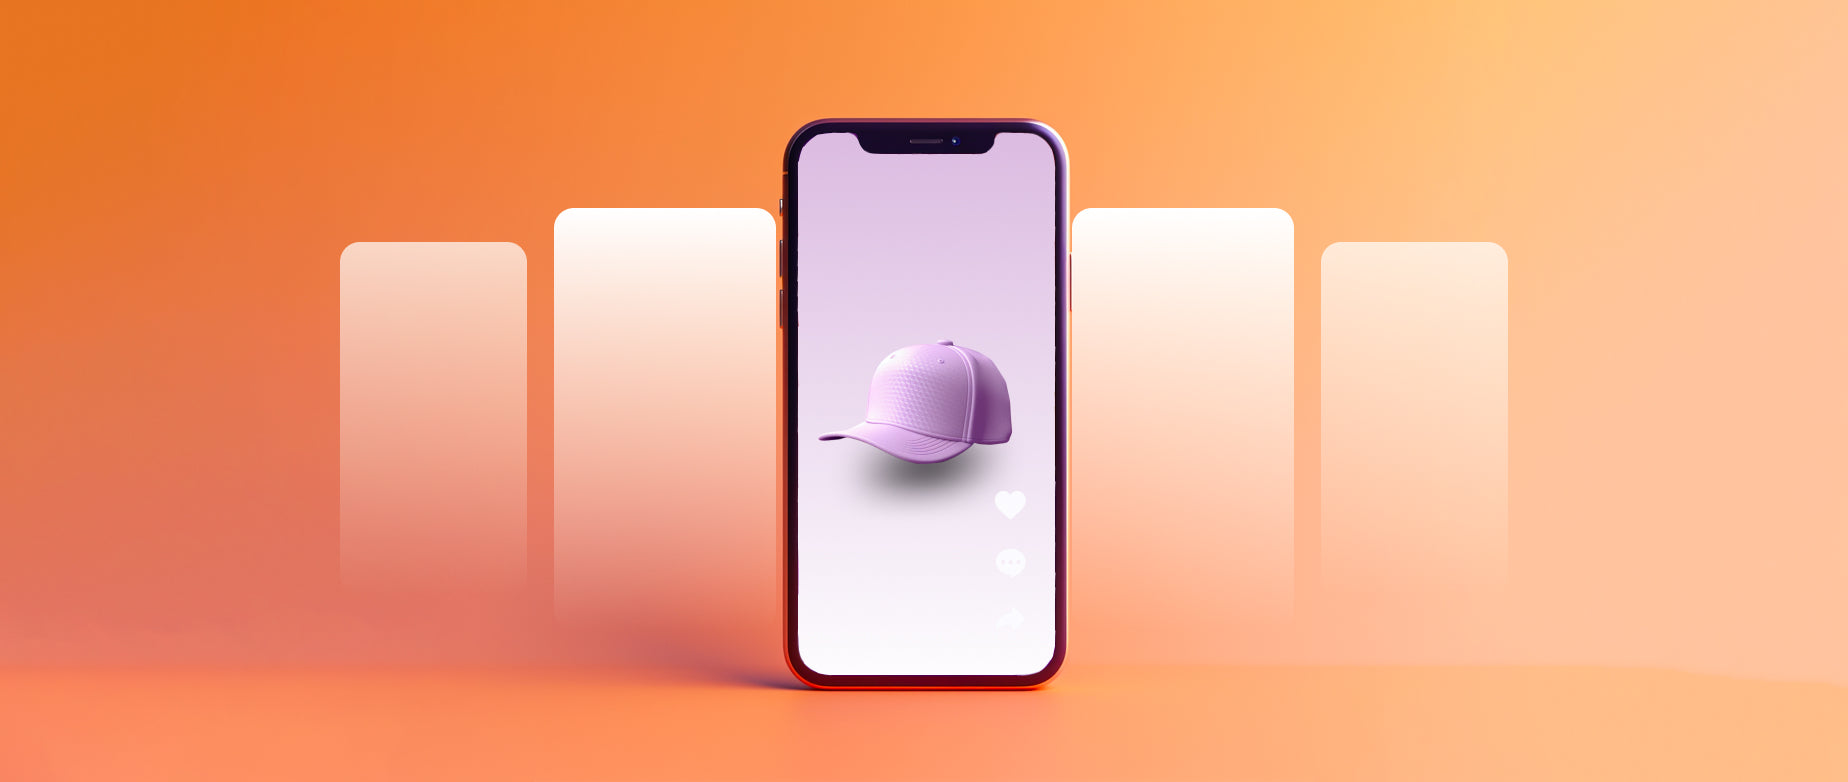 Graphic iPhone image with product image of ball cap depicting a TikTok ad